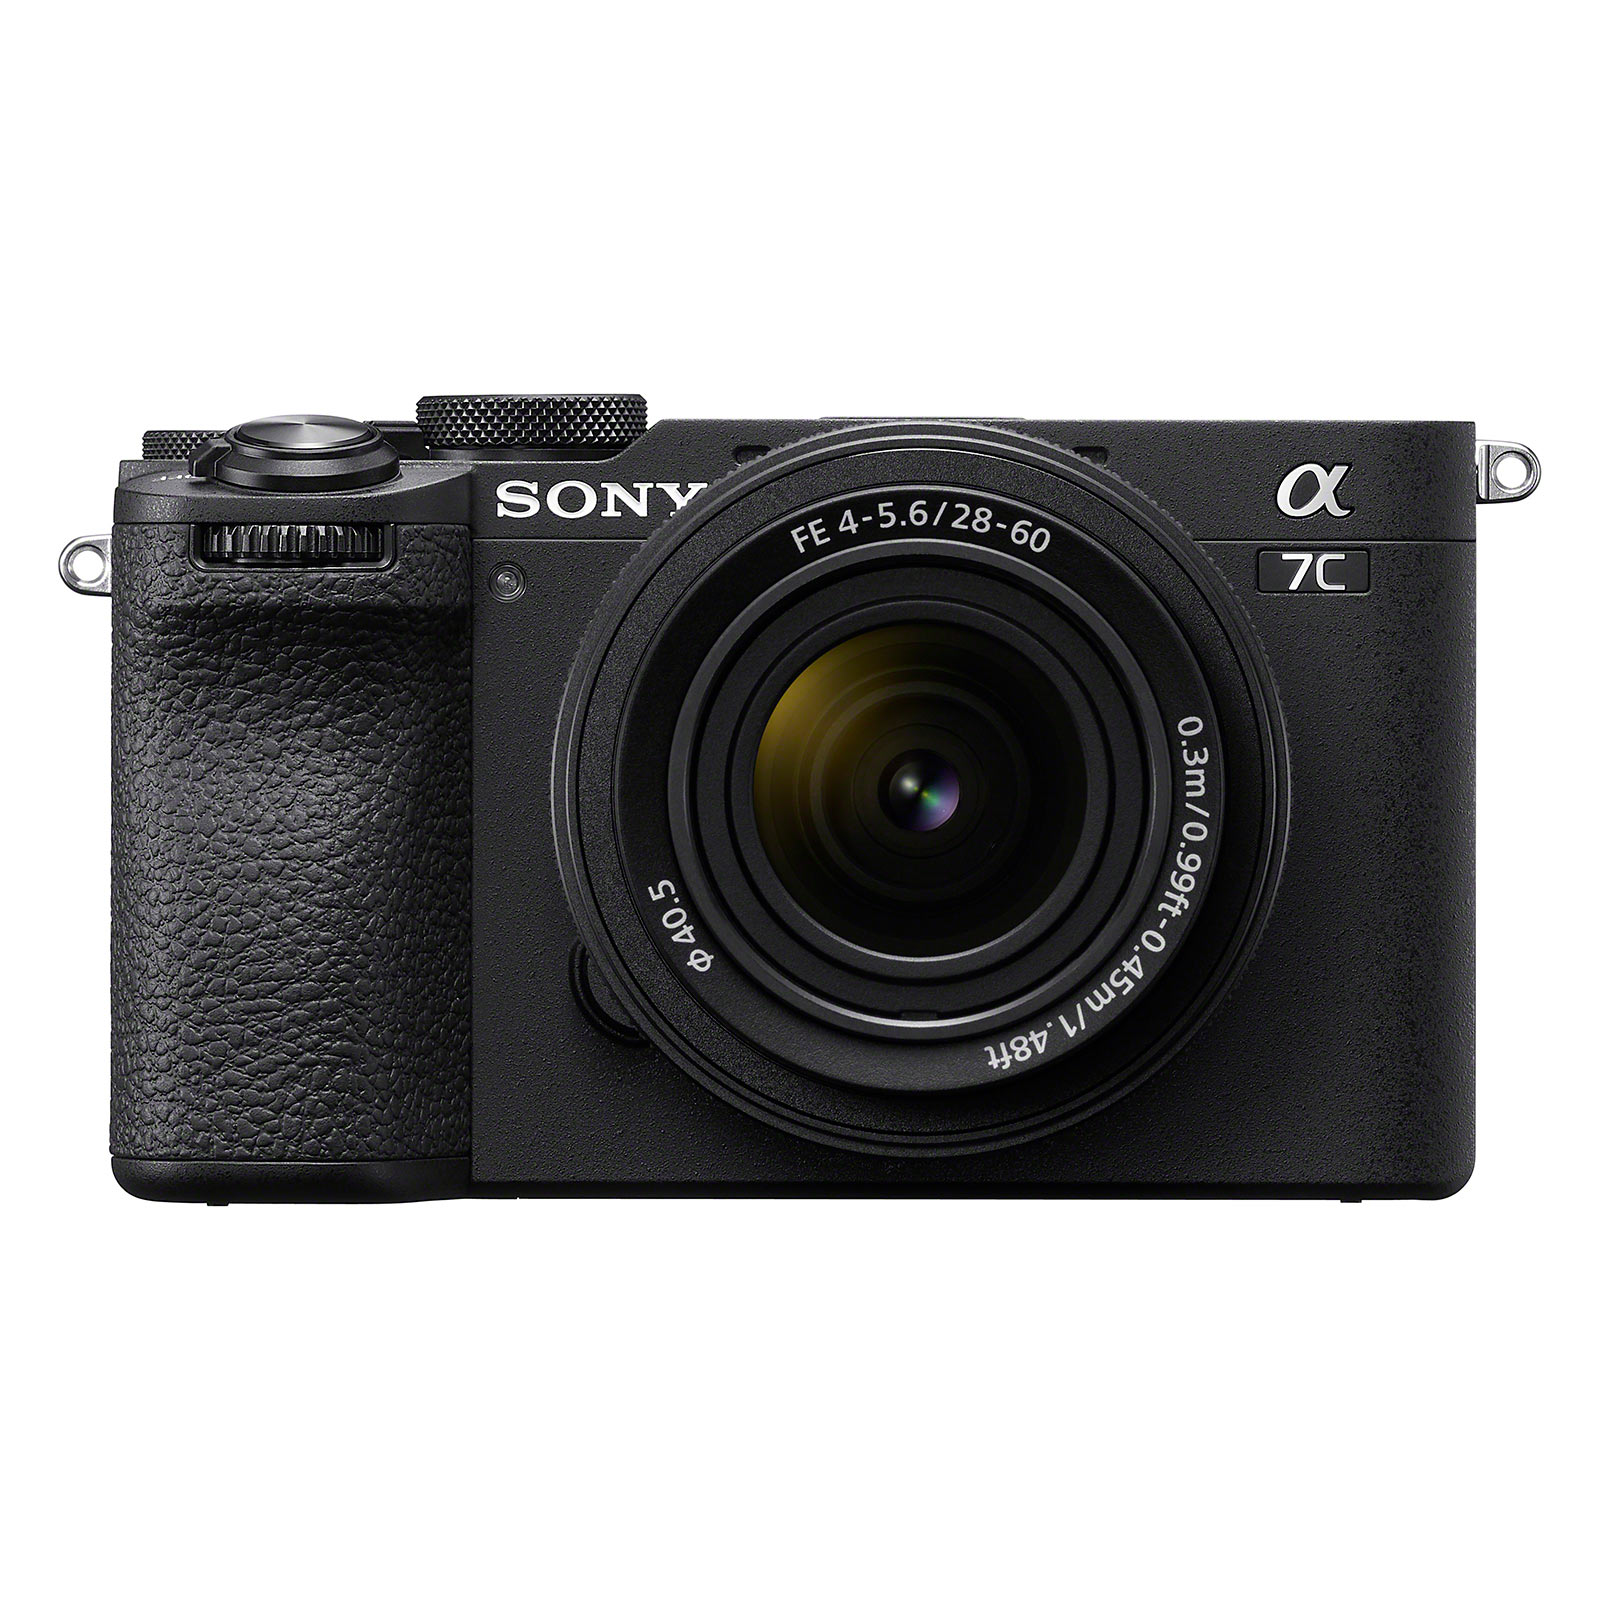 Image of Sony A7C II Digital Camera with 2860mm Lens Black